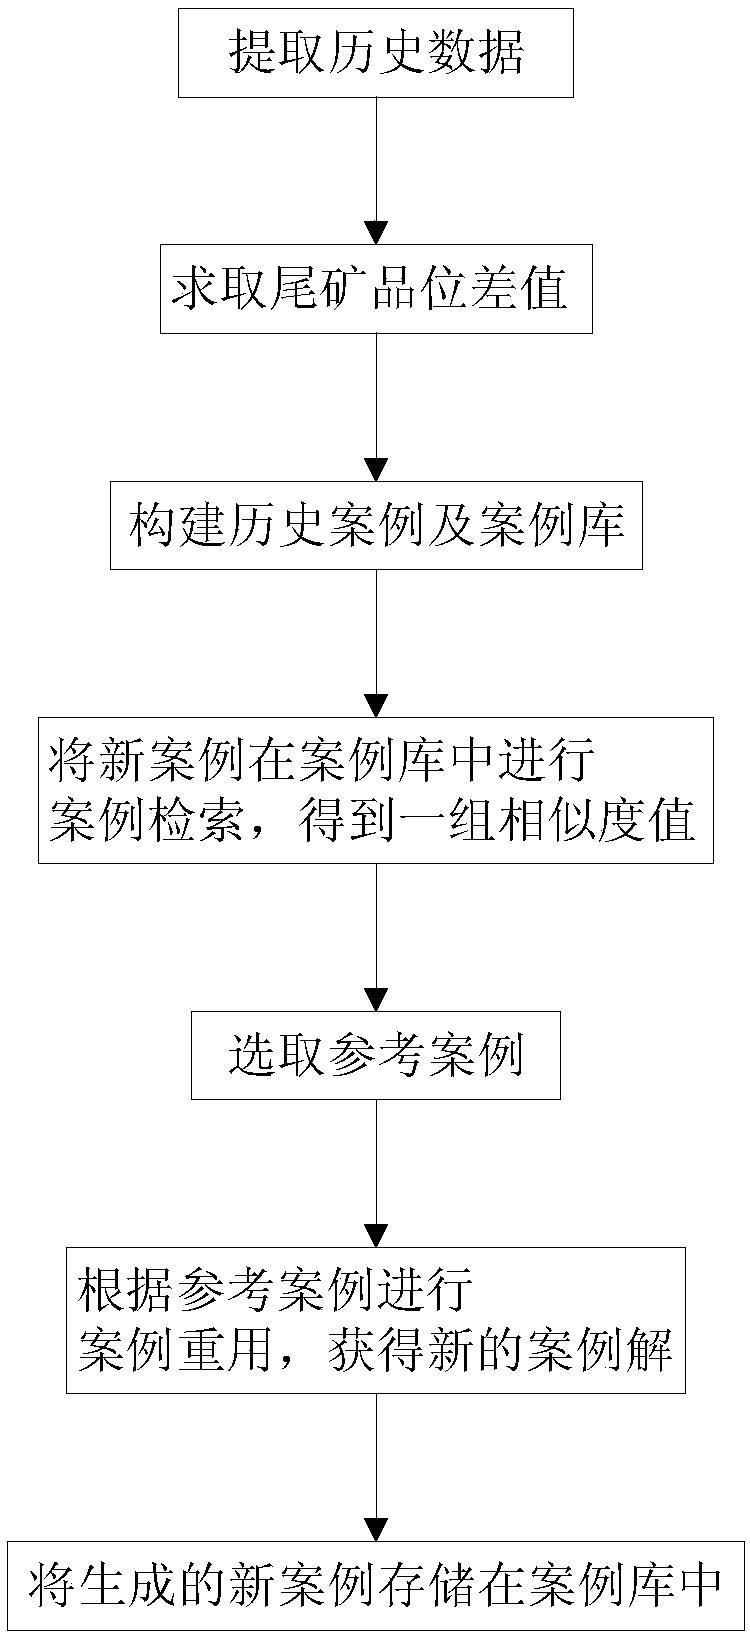 Automatic control method of iron ore flotation reagent dosage based on tailings grade